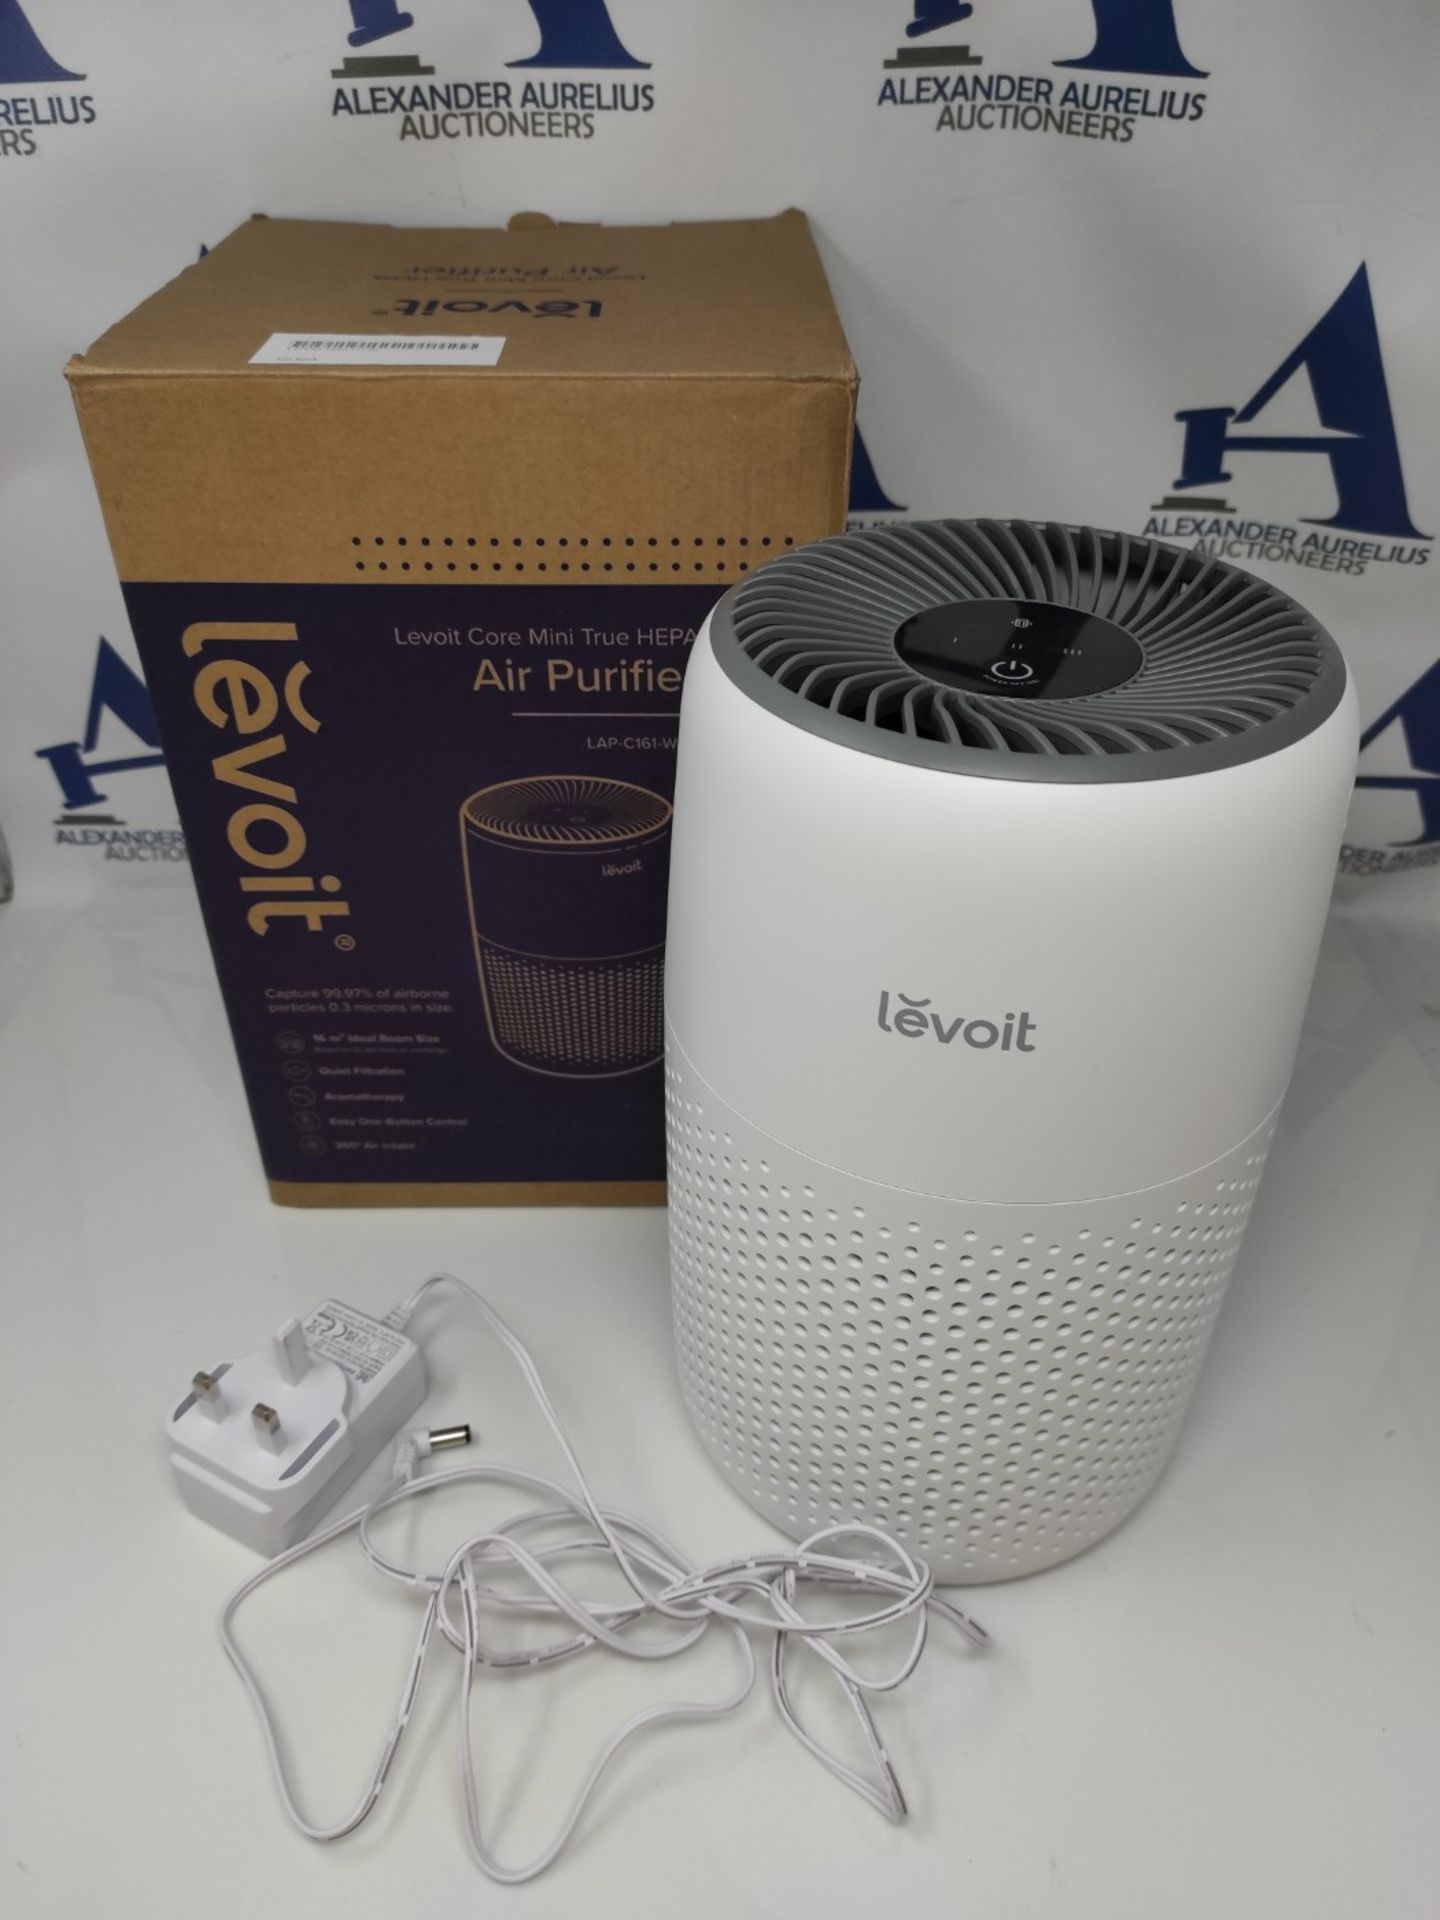 LEVOIT Air Purifier for Bedroom Home, Ultra Quiet HEPA Filter Cleaner with Fragrance S - Image 2 of 2